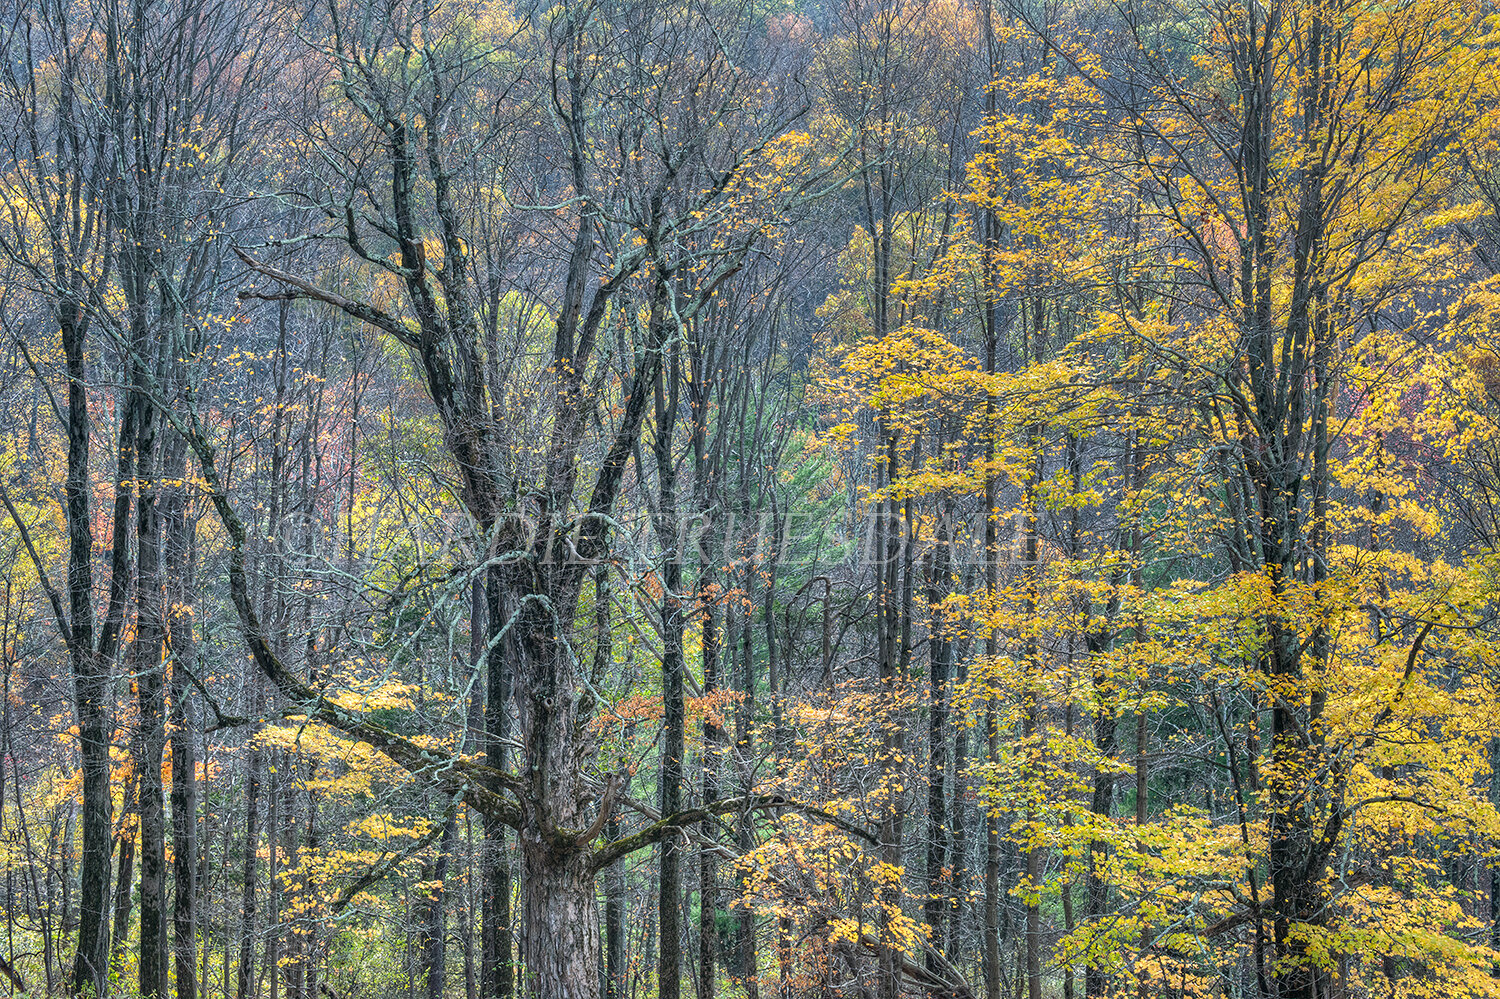 Gks#881 "Late Fall Maples, Mohonk Preserve"